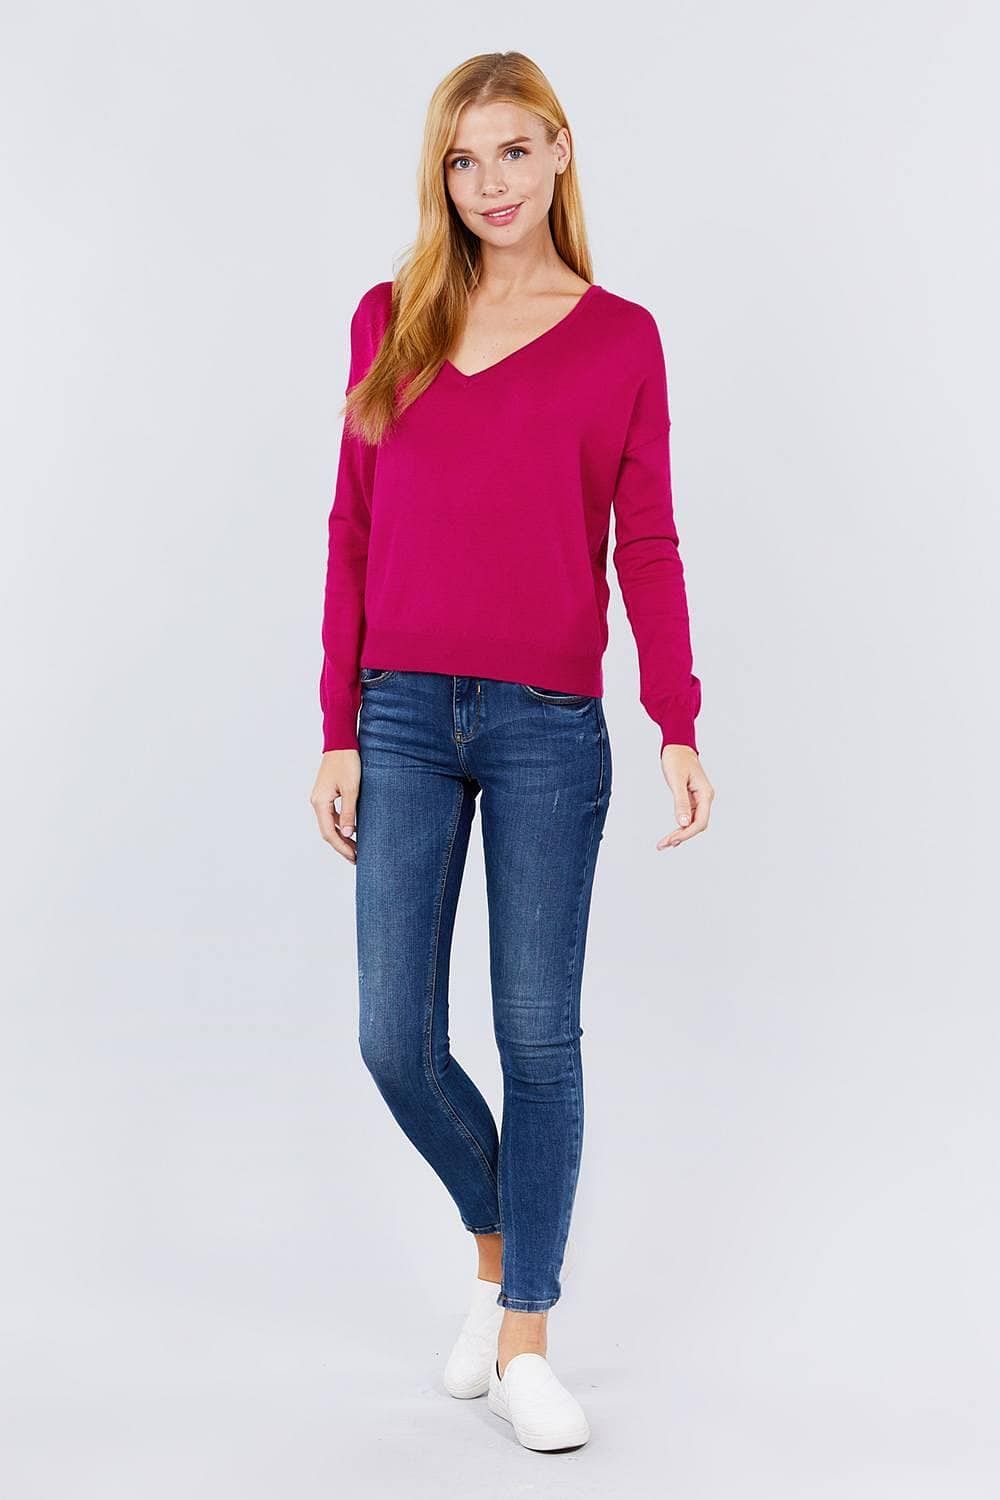 Magenta Long Sleeve V-Neck Pullover Sweater - Shopping Therapy, LLC Sweater